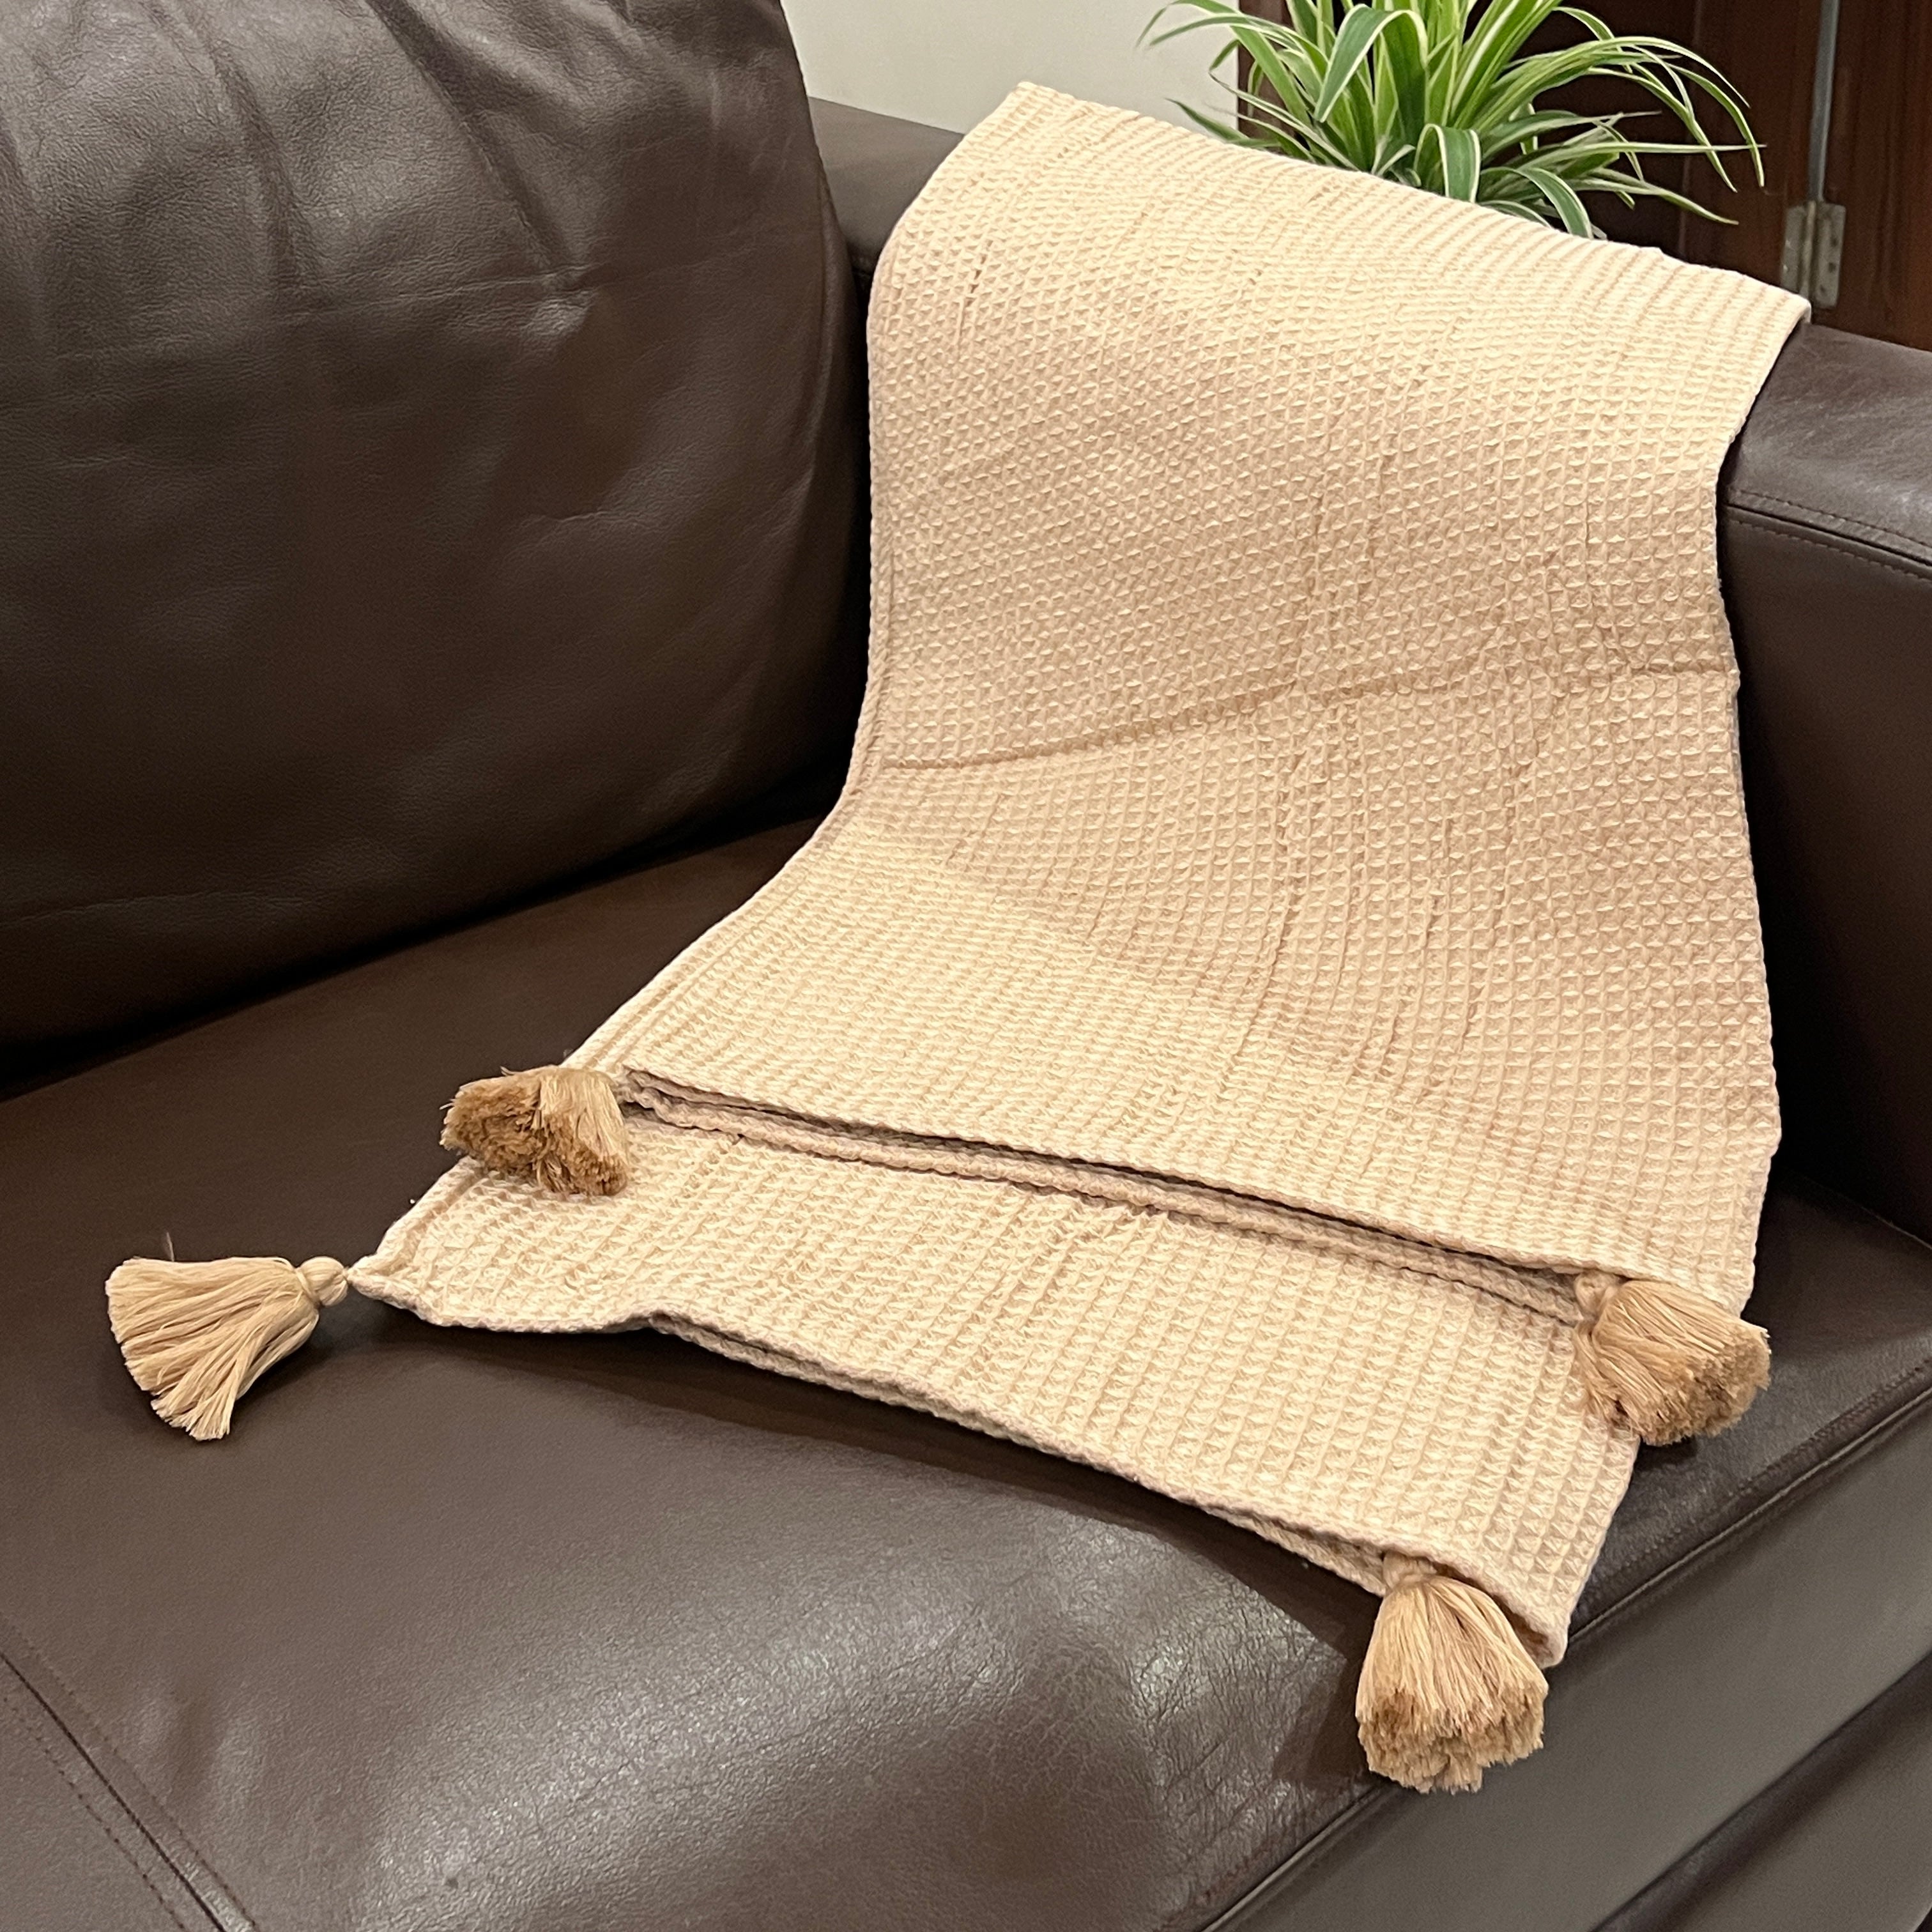 Honeycomb Oats Beige Woven Throw with Tassels